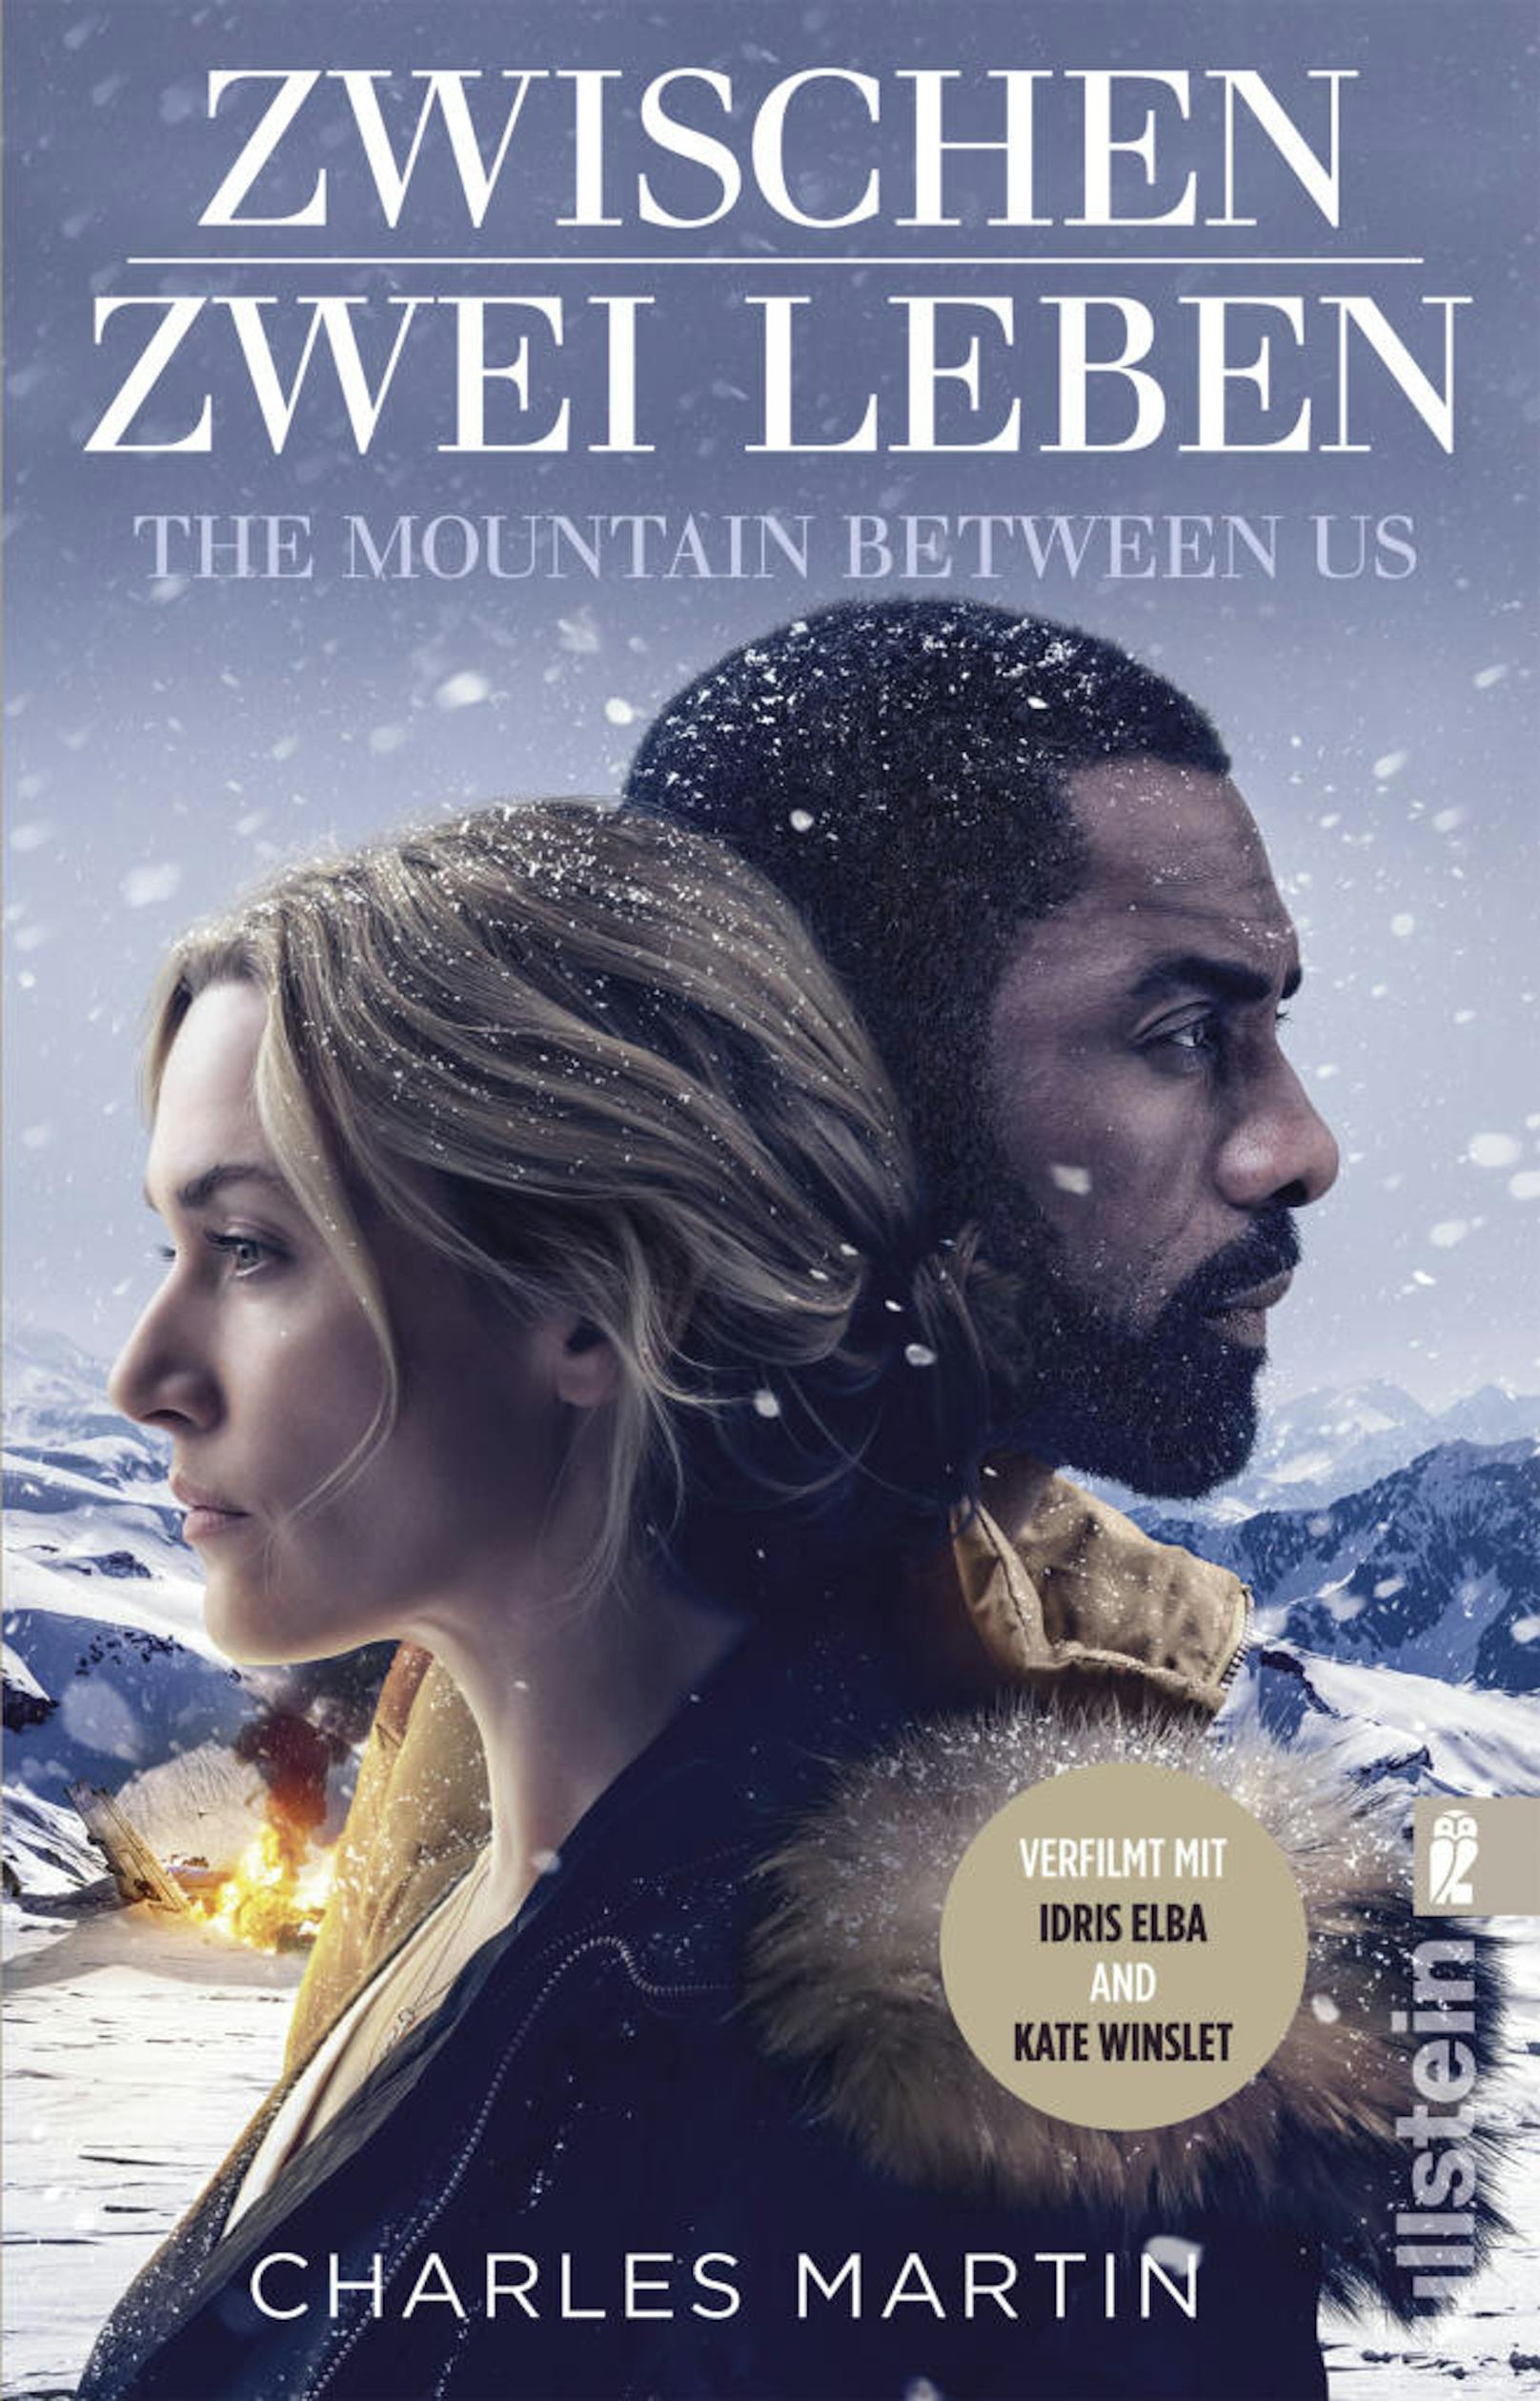 "The Mountain Between Us"